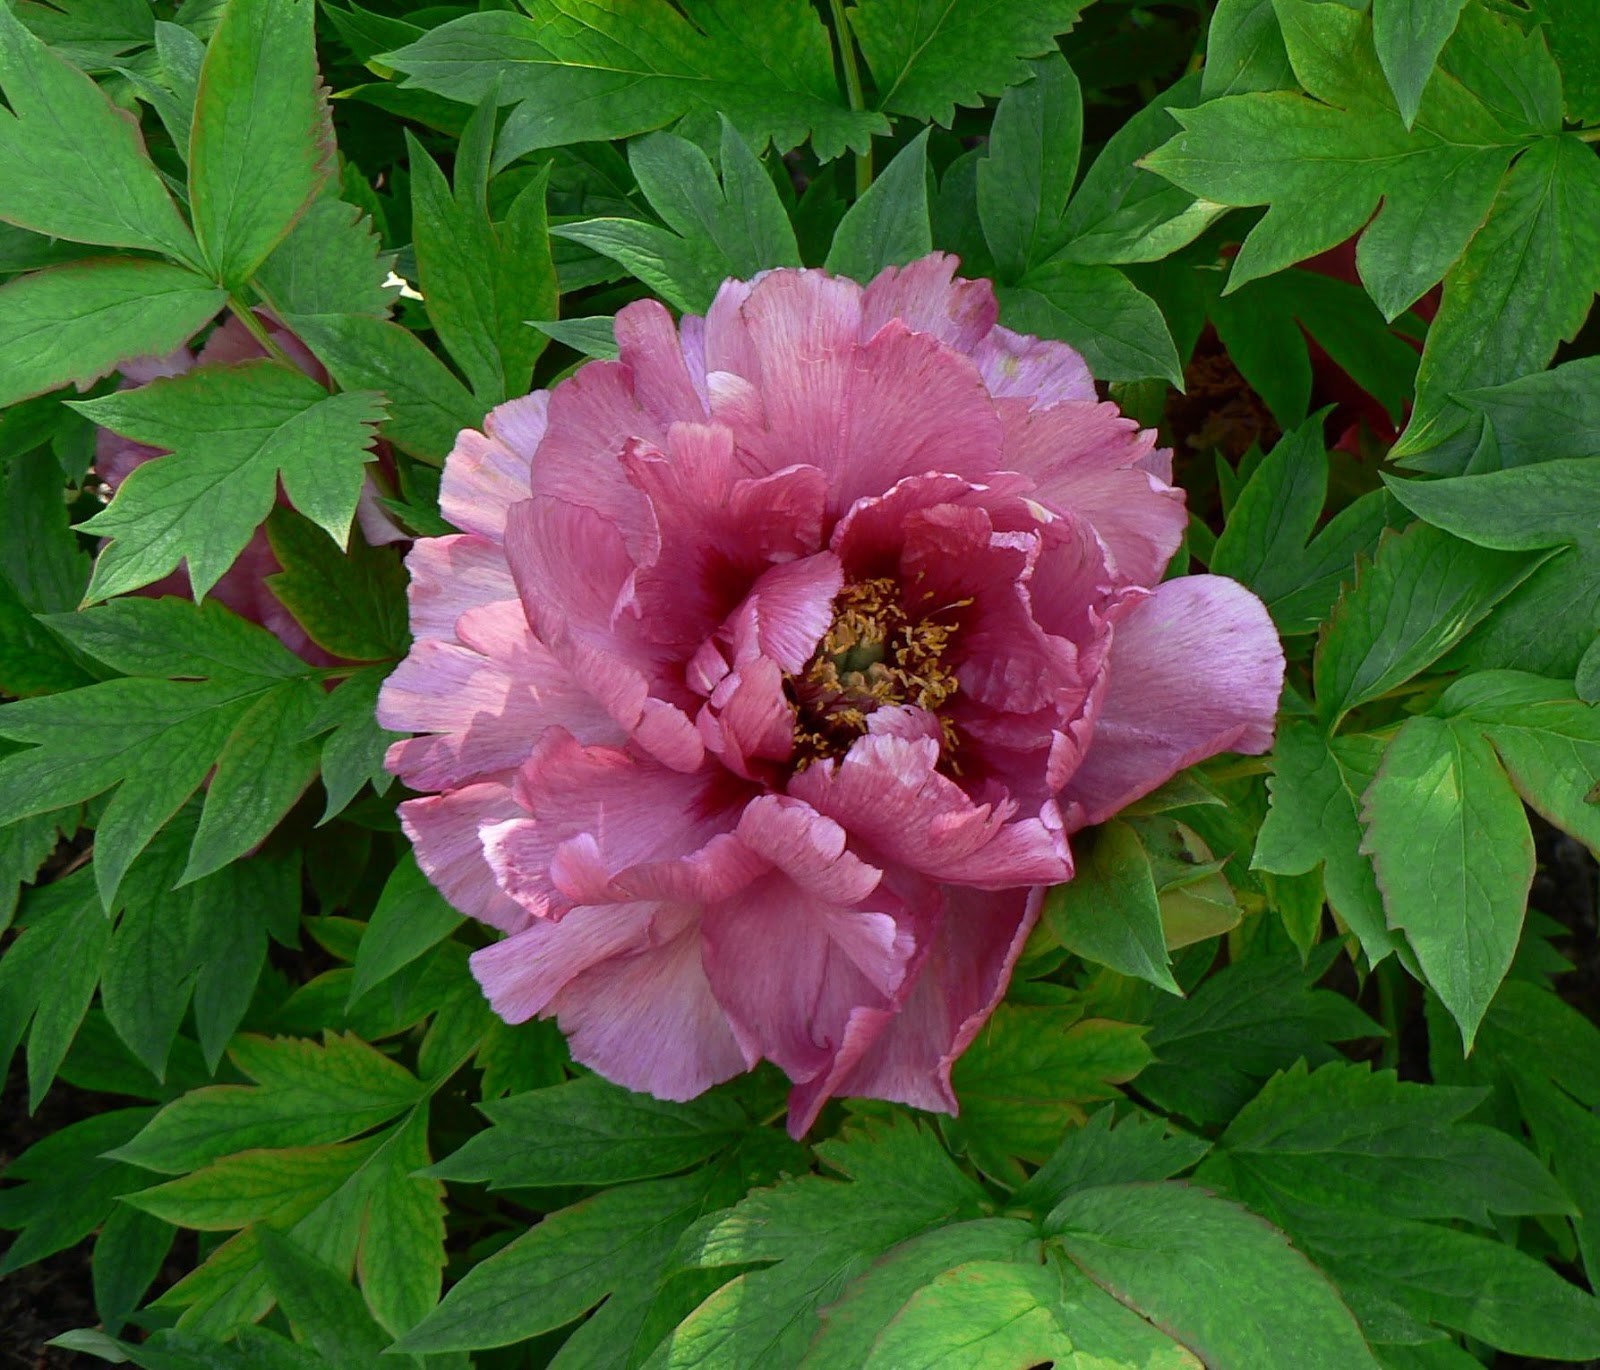 Visit My Garden: Japanese Tree Peonies at Olbrich